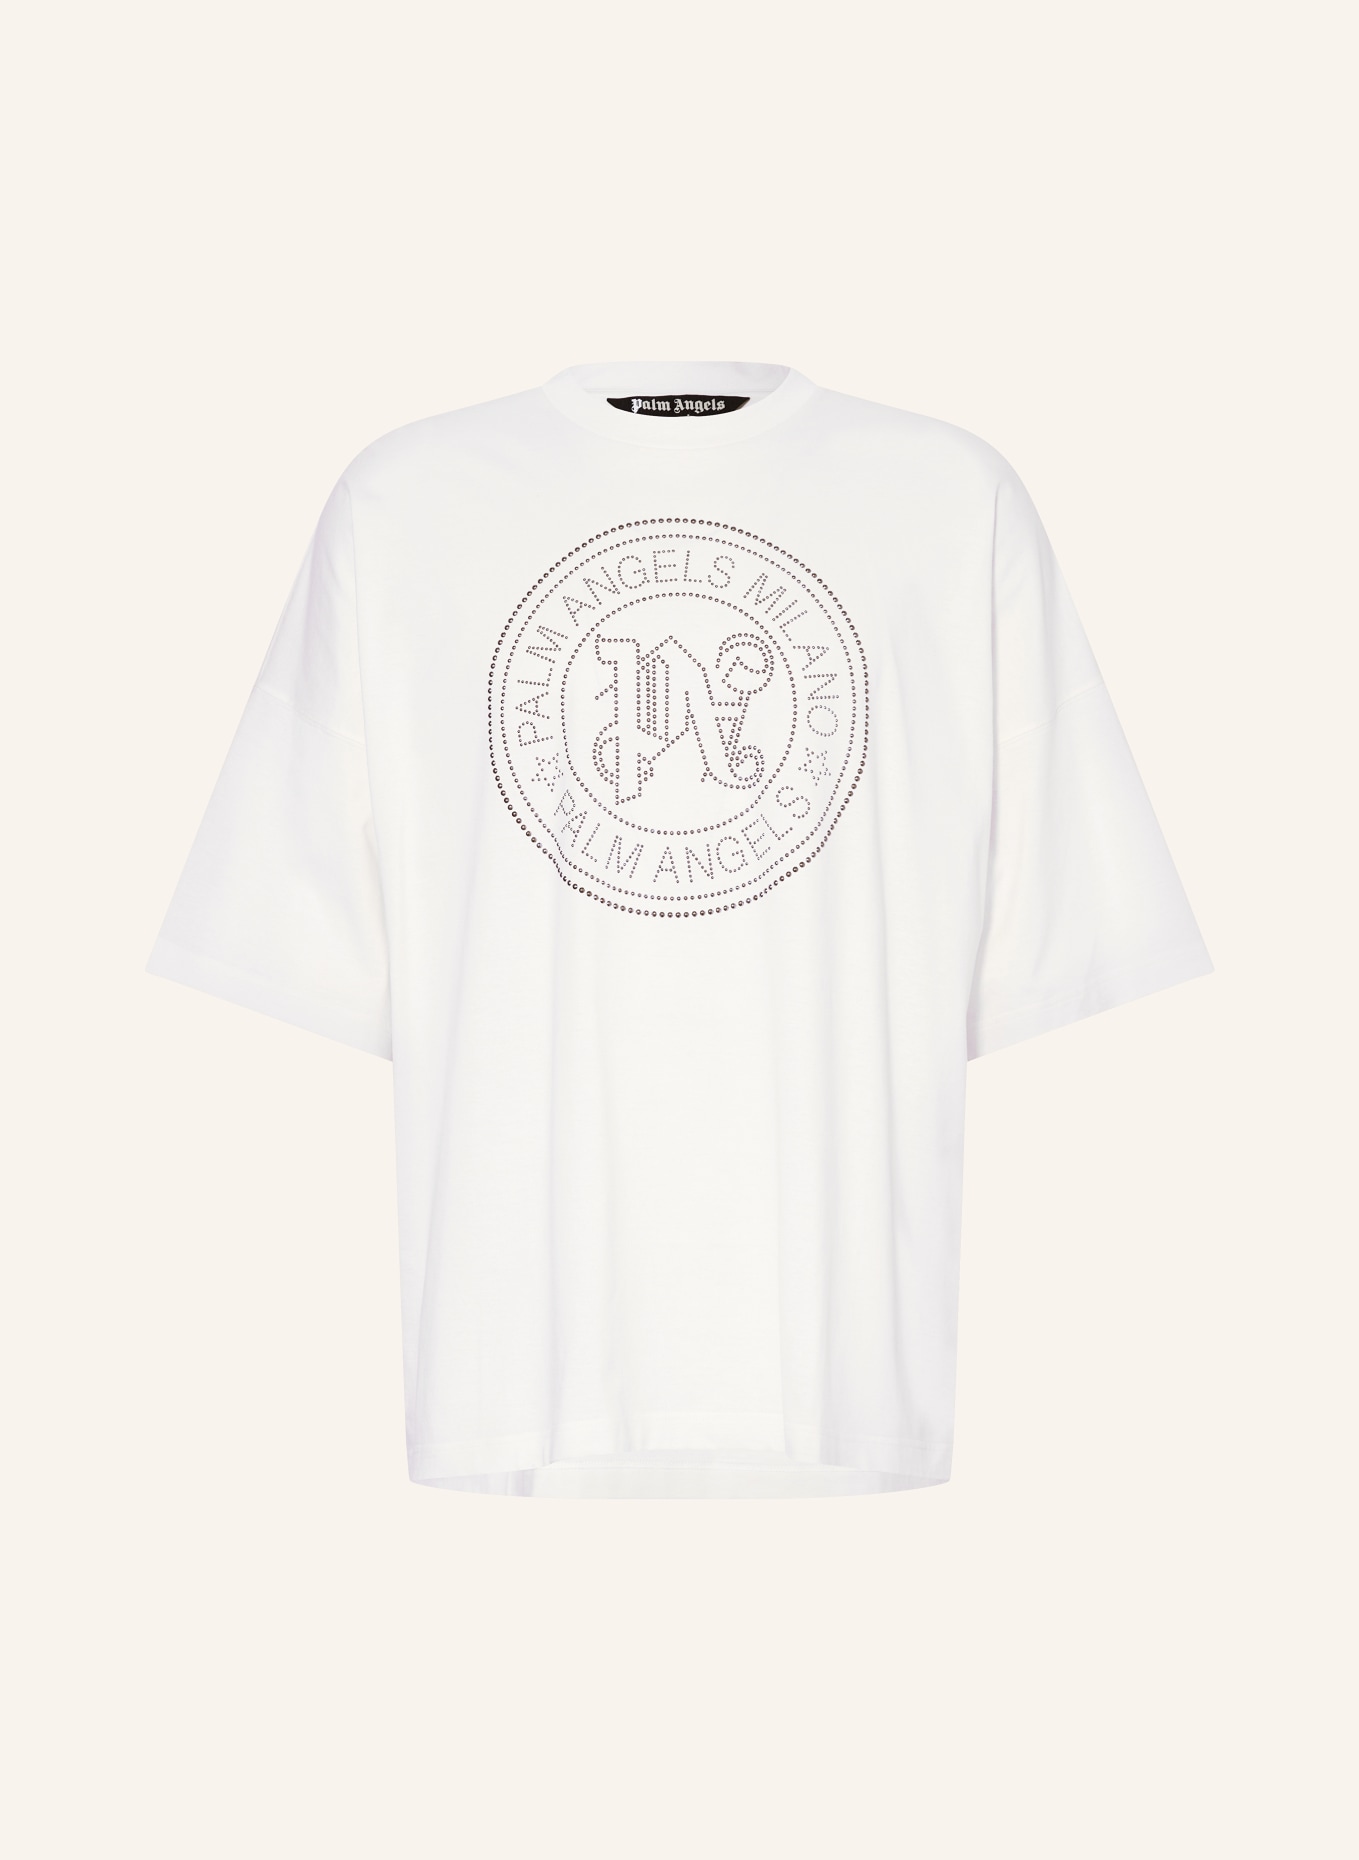 Palm Angels T-shirt in white